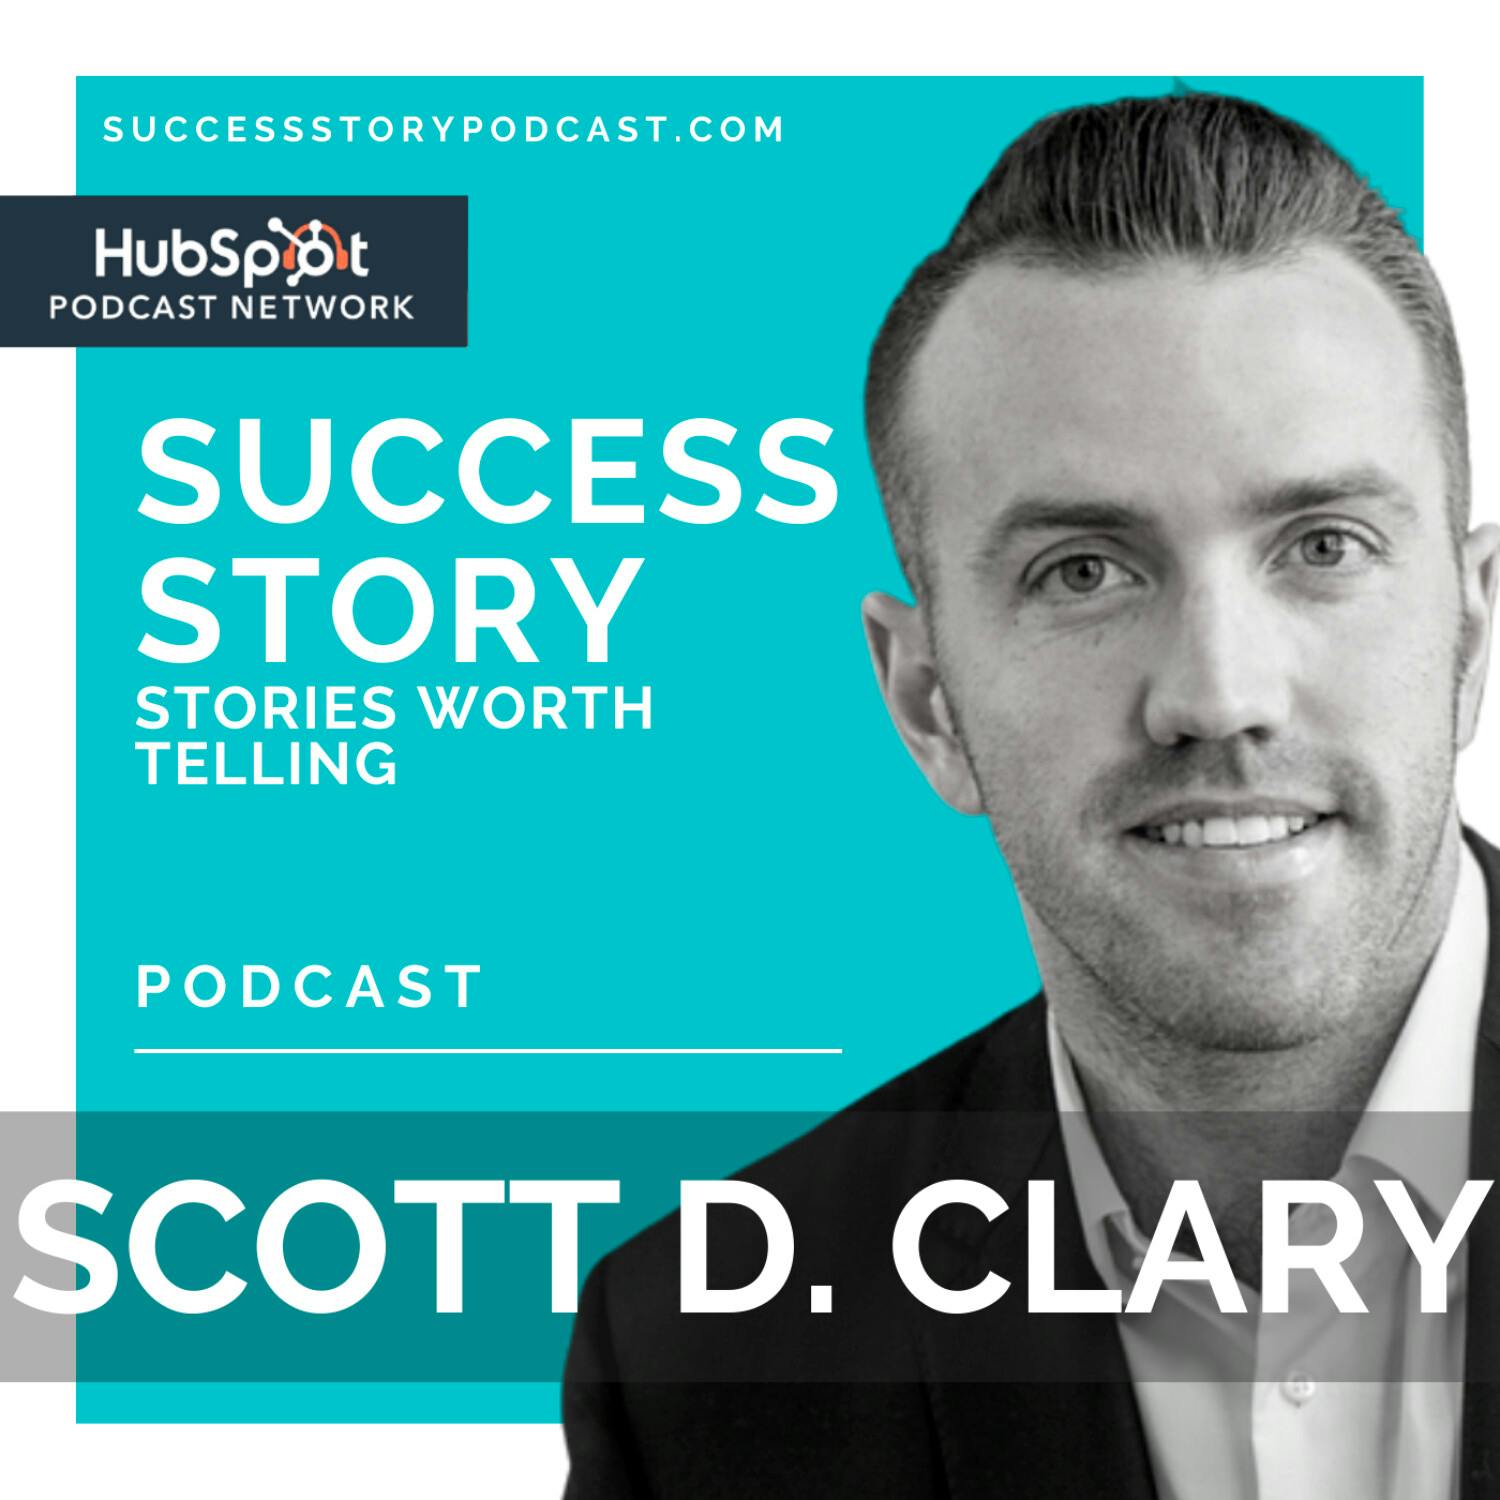 How to Turn Your LinkedIn Profile into a Lead Generating & Money Making Machine w/ Sales Hustle & Collin Mitchell #scottsthoughts